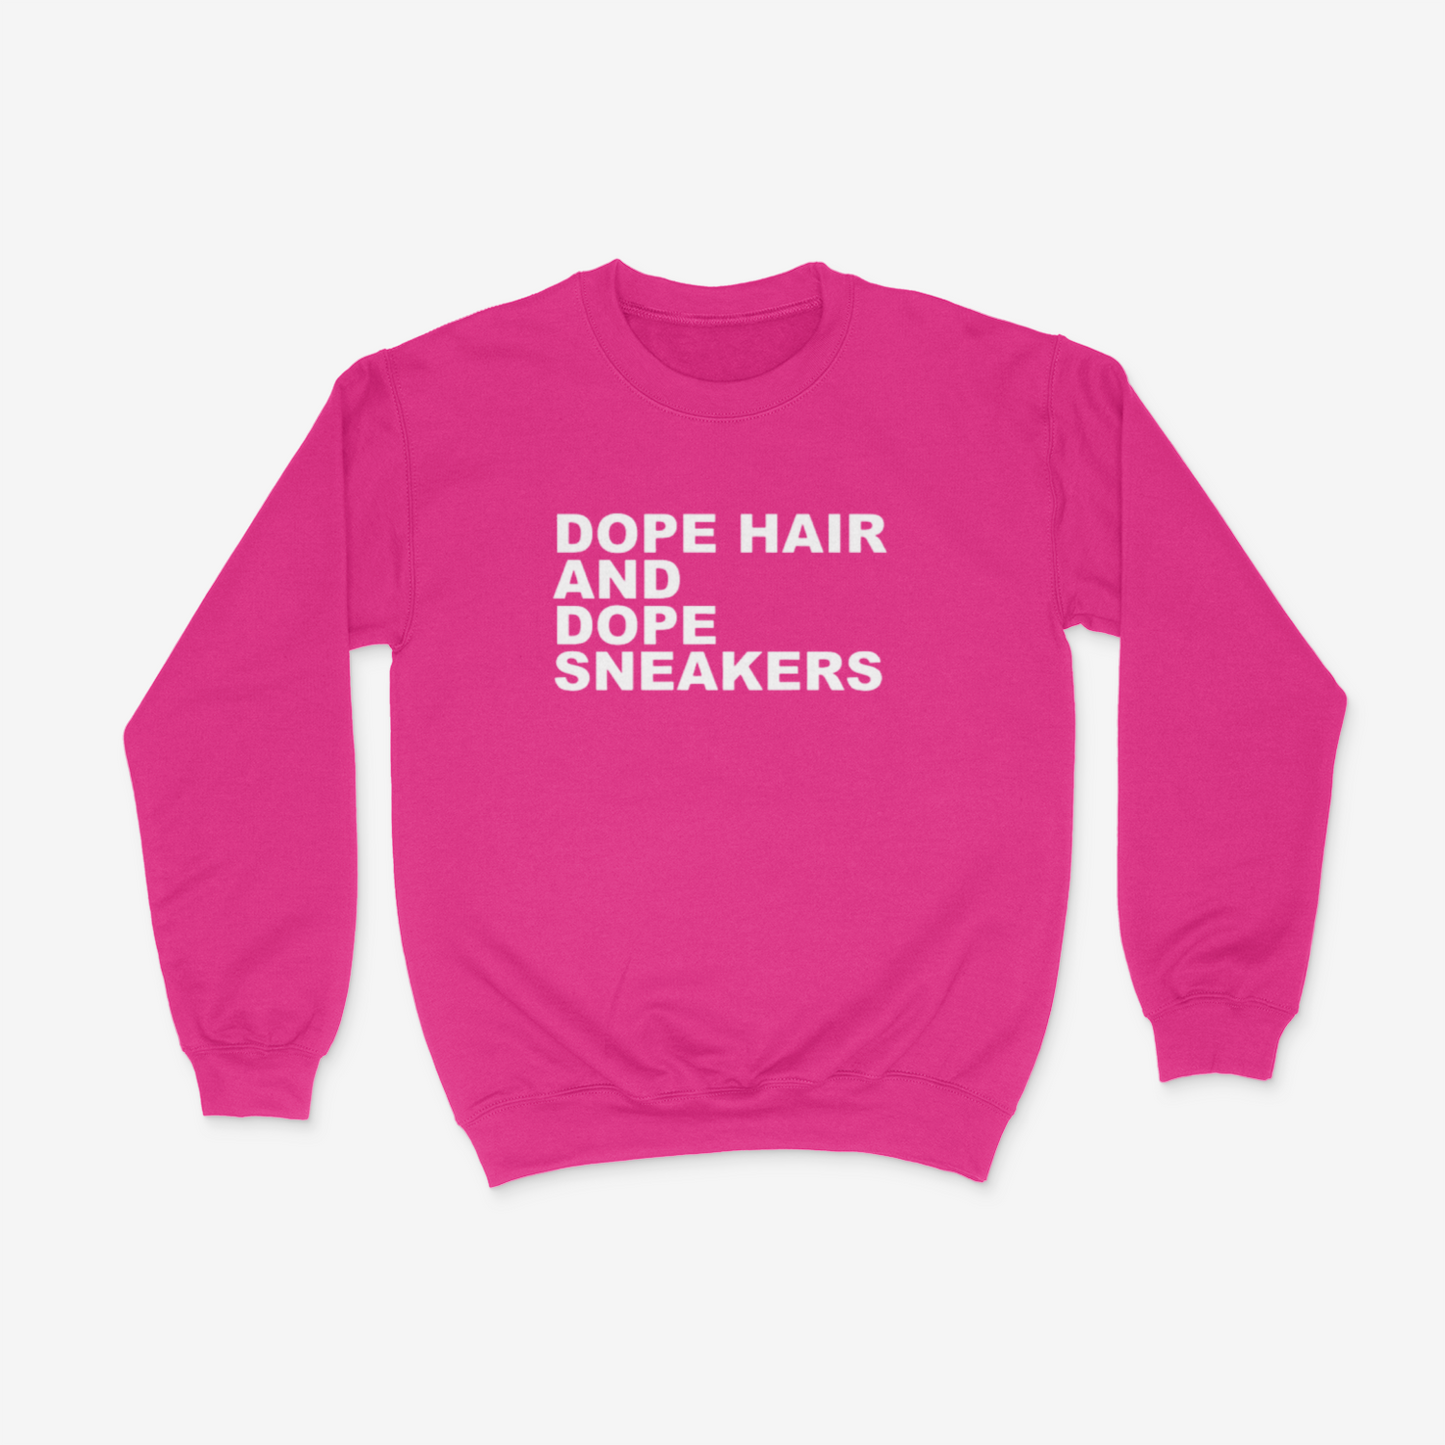 Dope Hair and Dope Sneakers Crewneck( White)